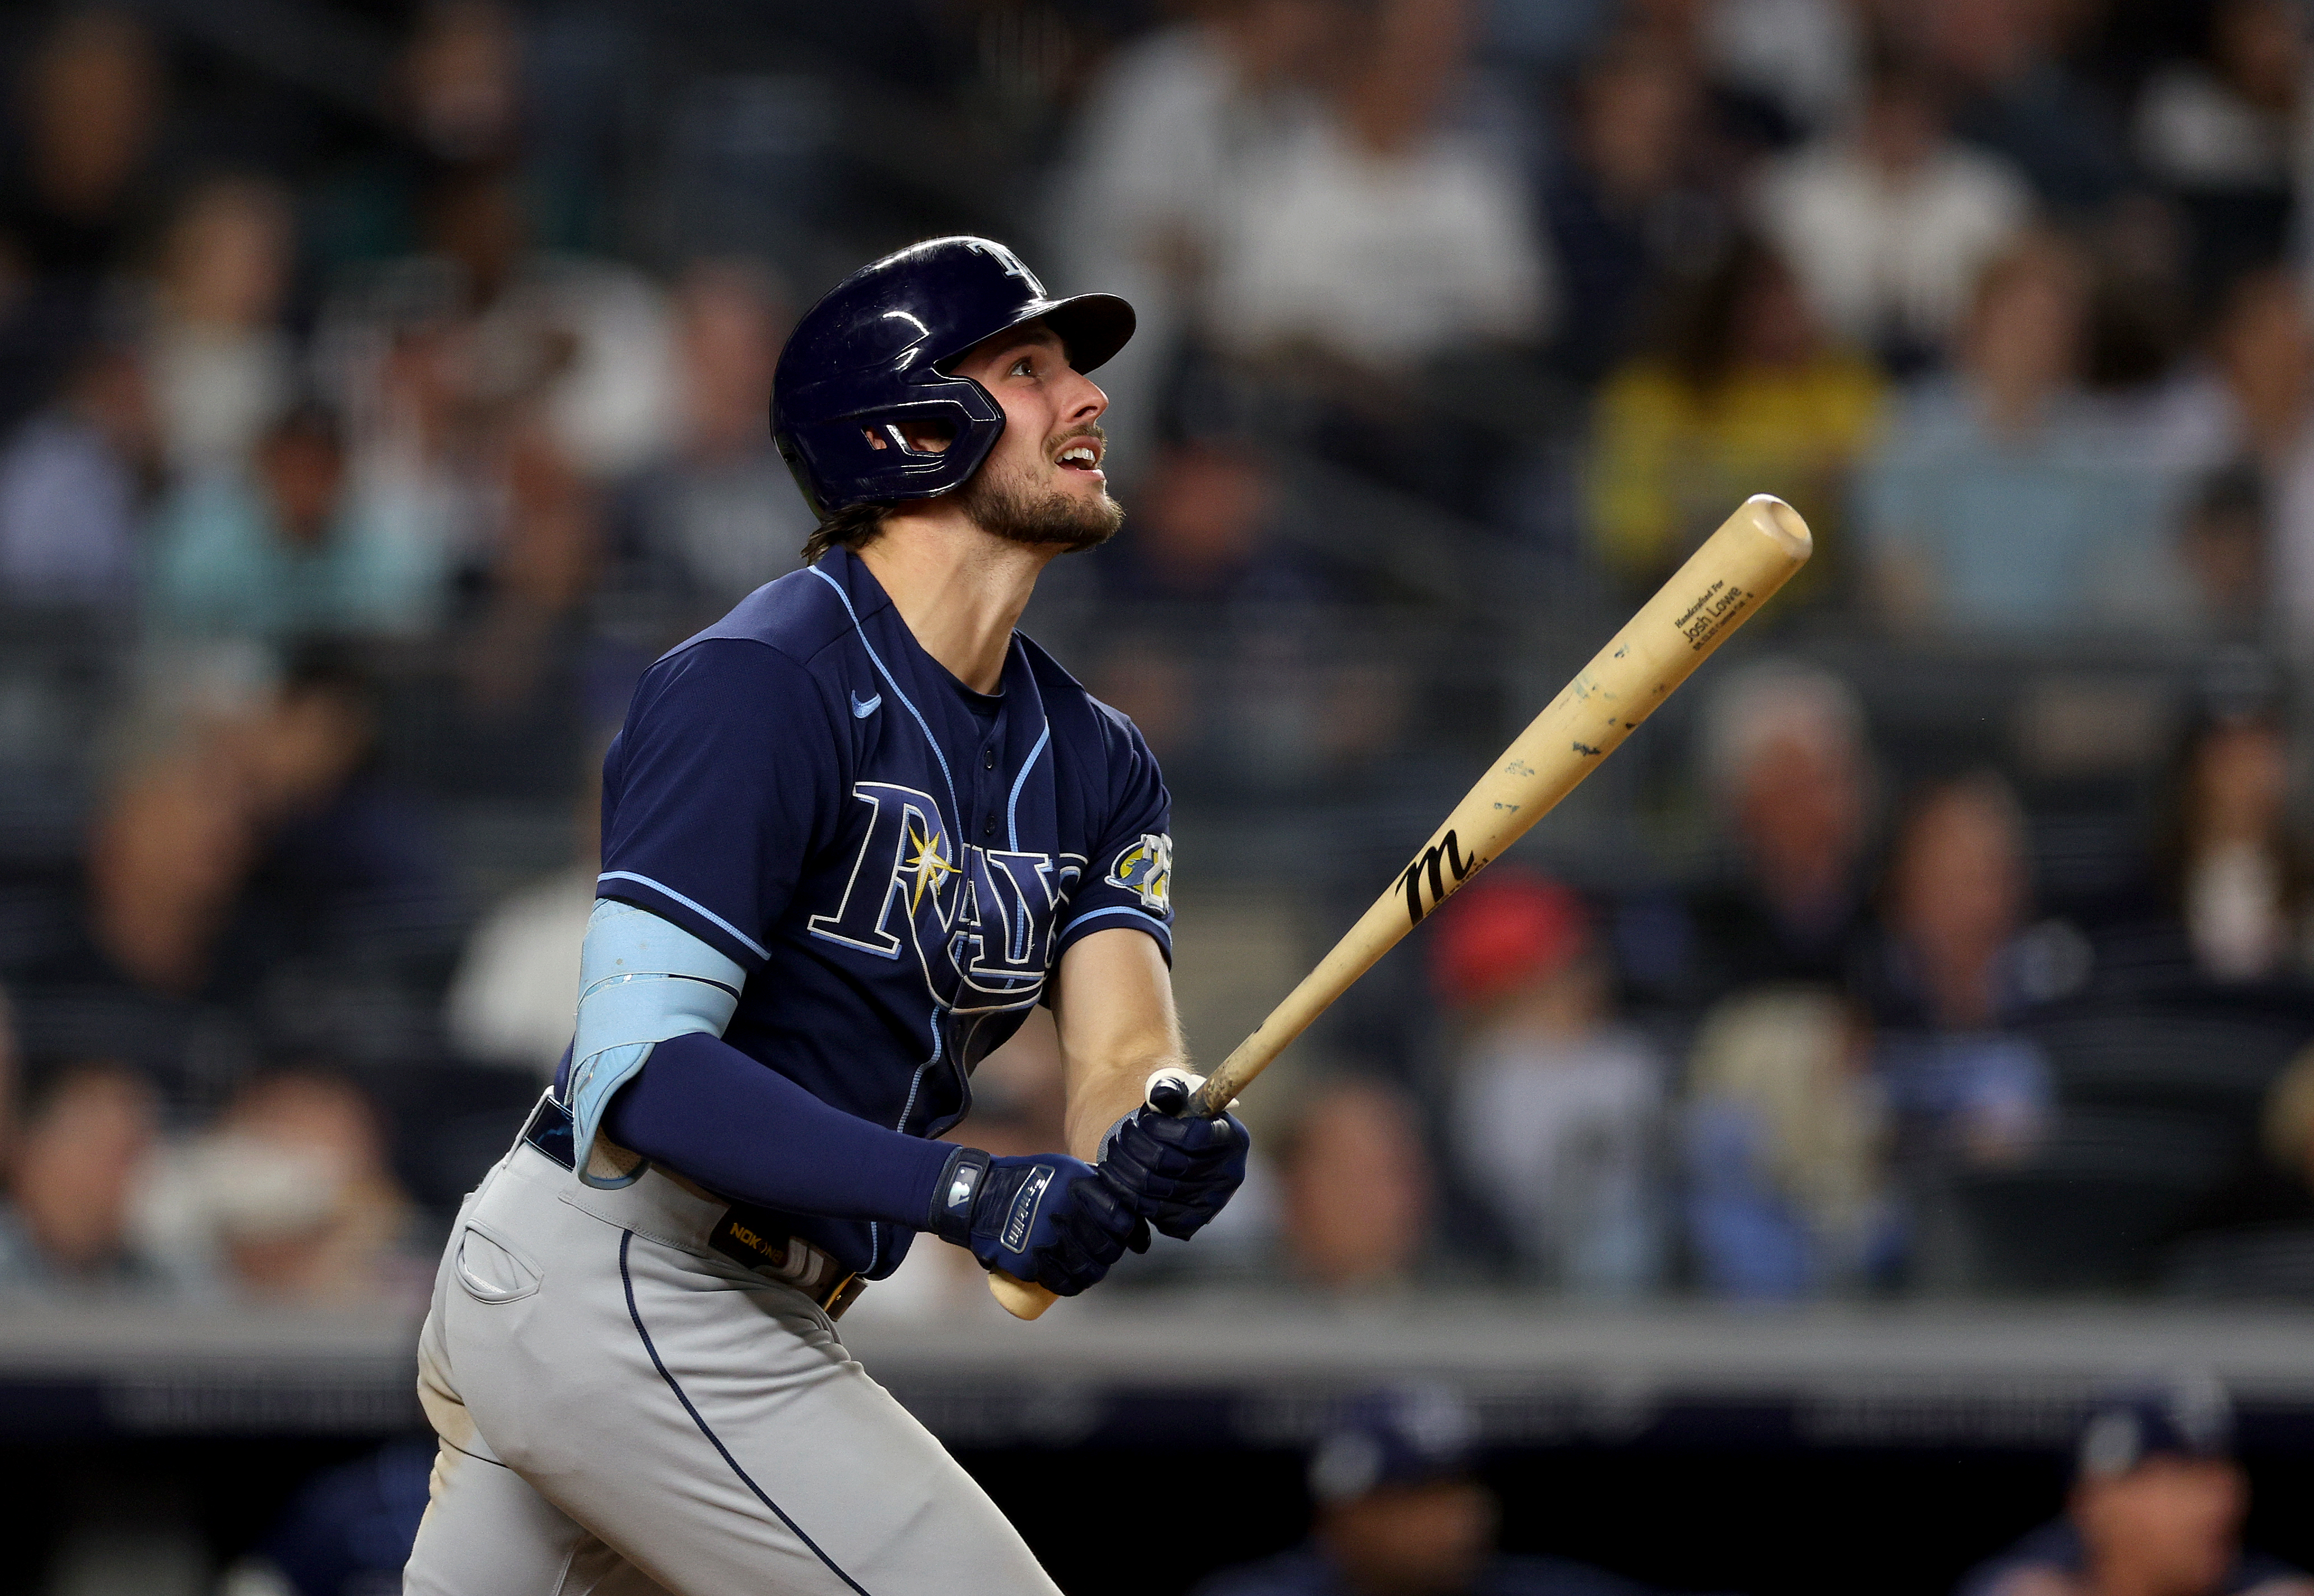 Rays secure their 30th win beating the Yankees with a powerful